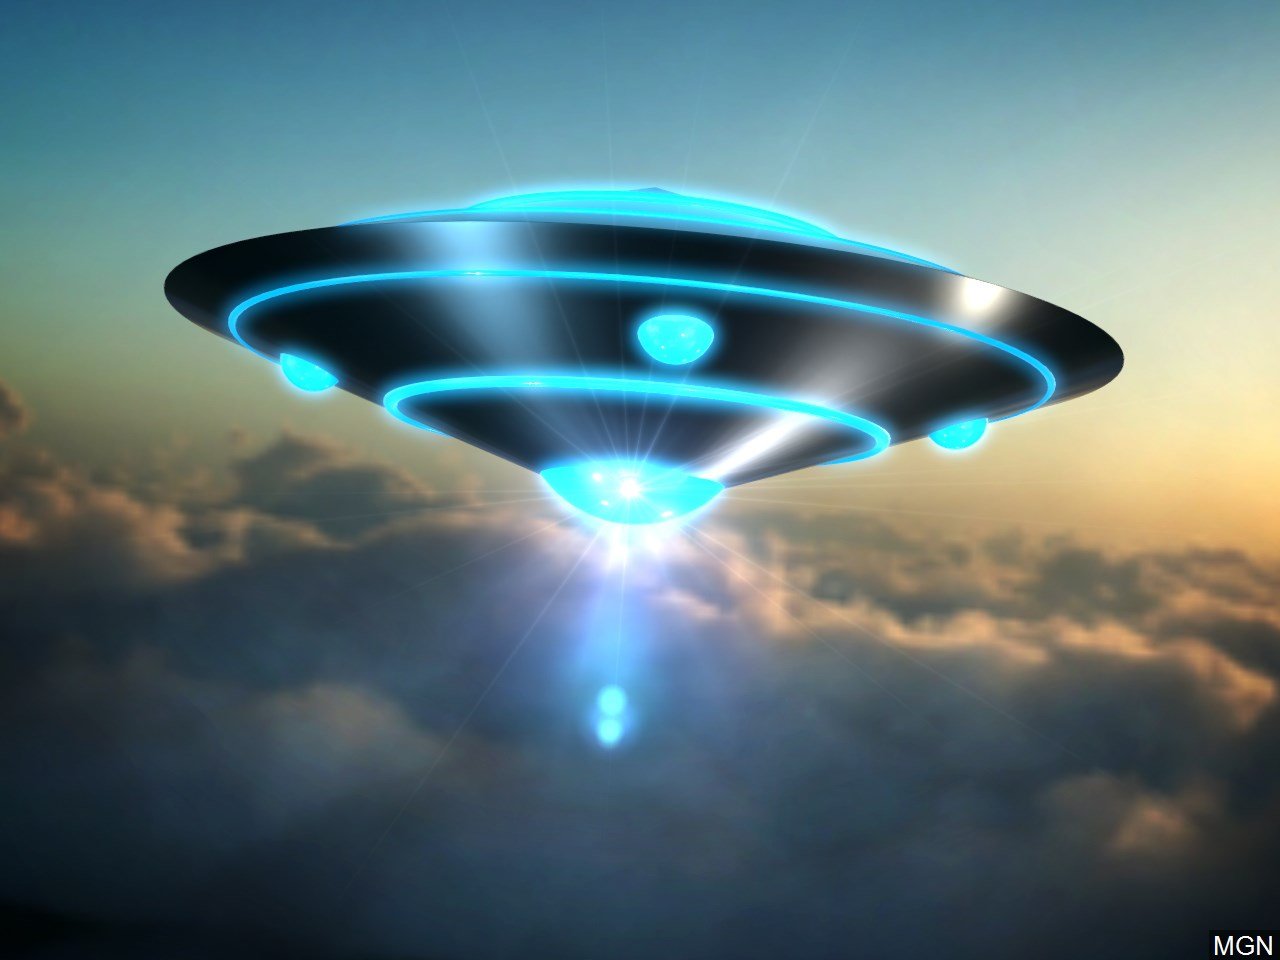 UFO hearing preview: What will be revealed?